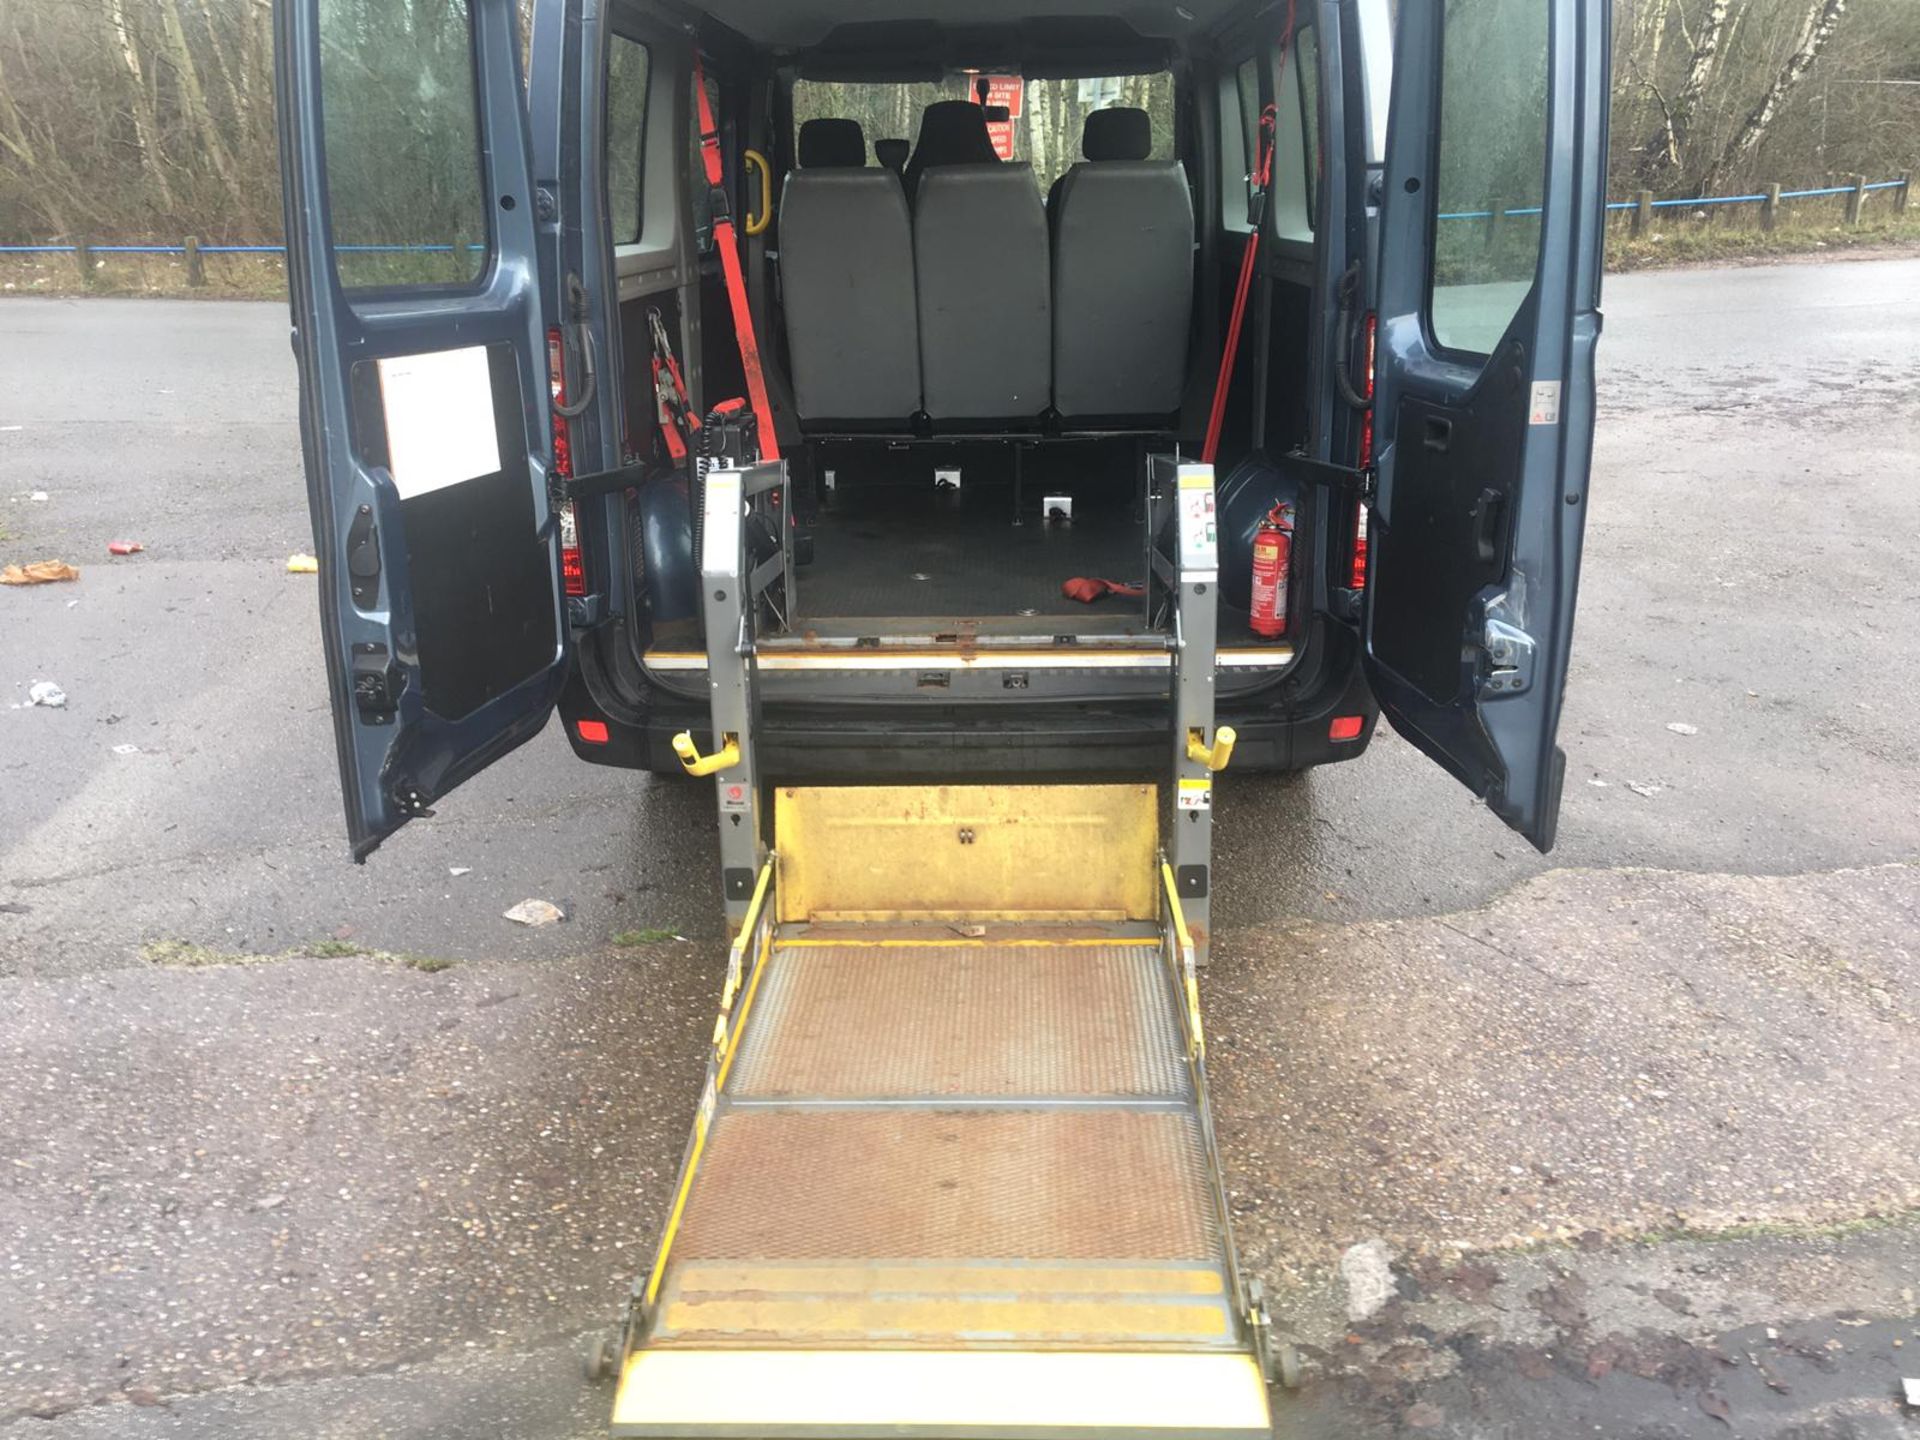 2013/63 REG RENAULT MASTER 2.3 DIESEL DISABLED ACCESS VEHICLE / MINIBUS, SHOWING 2 FORMER KEEPERS - Image 9 of 33